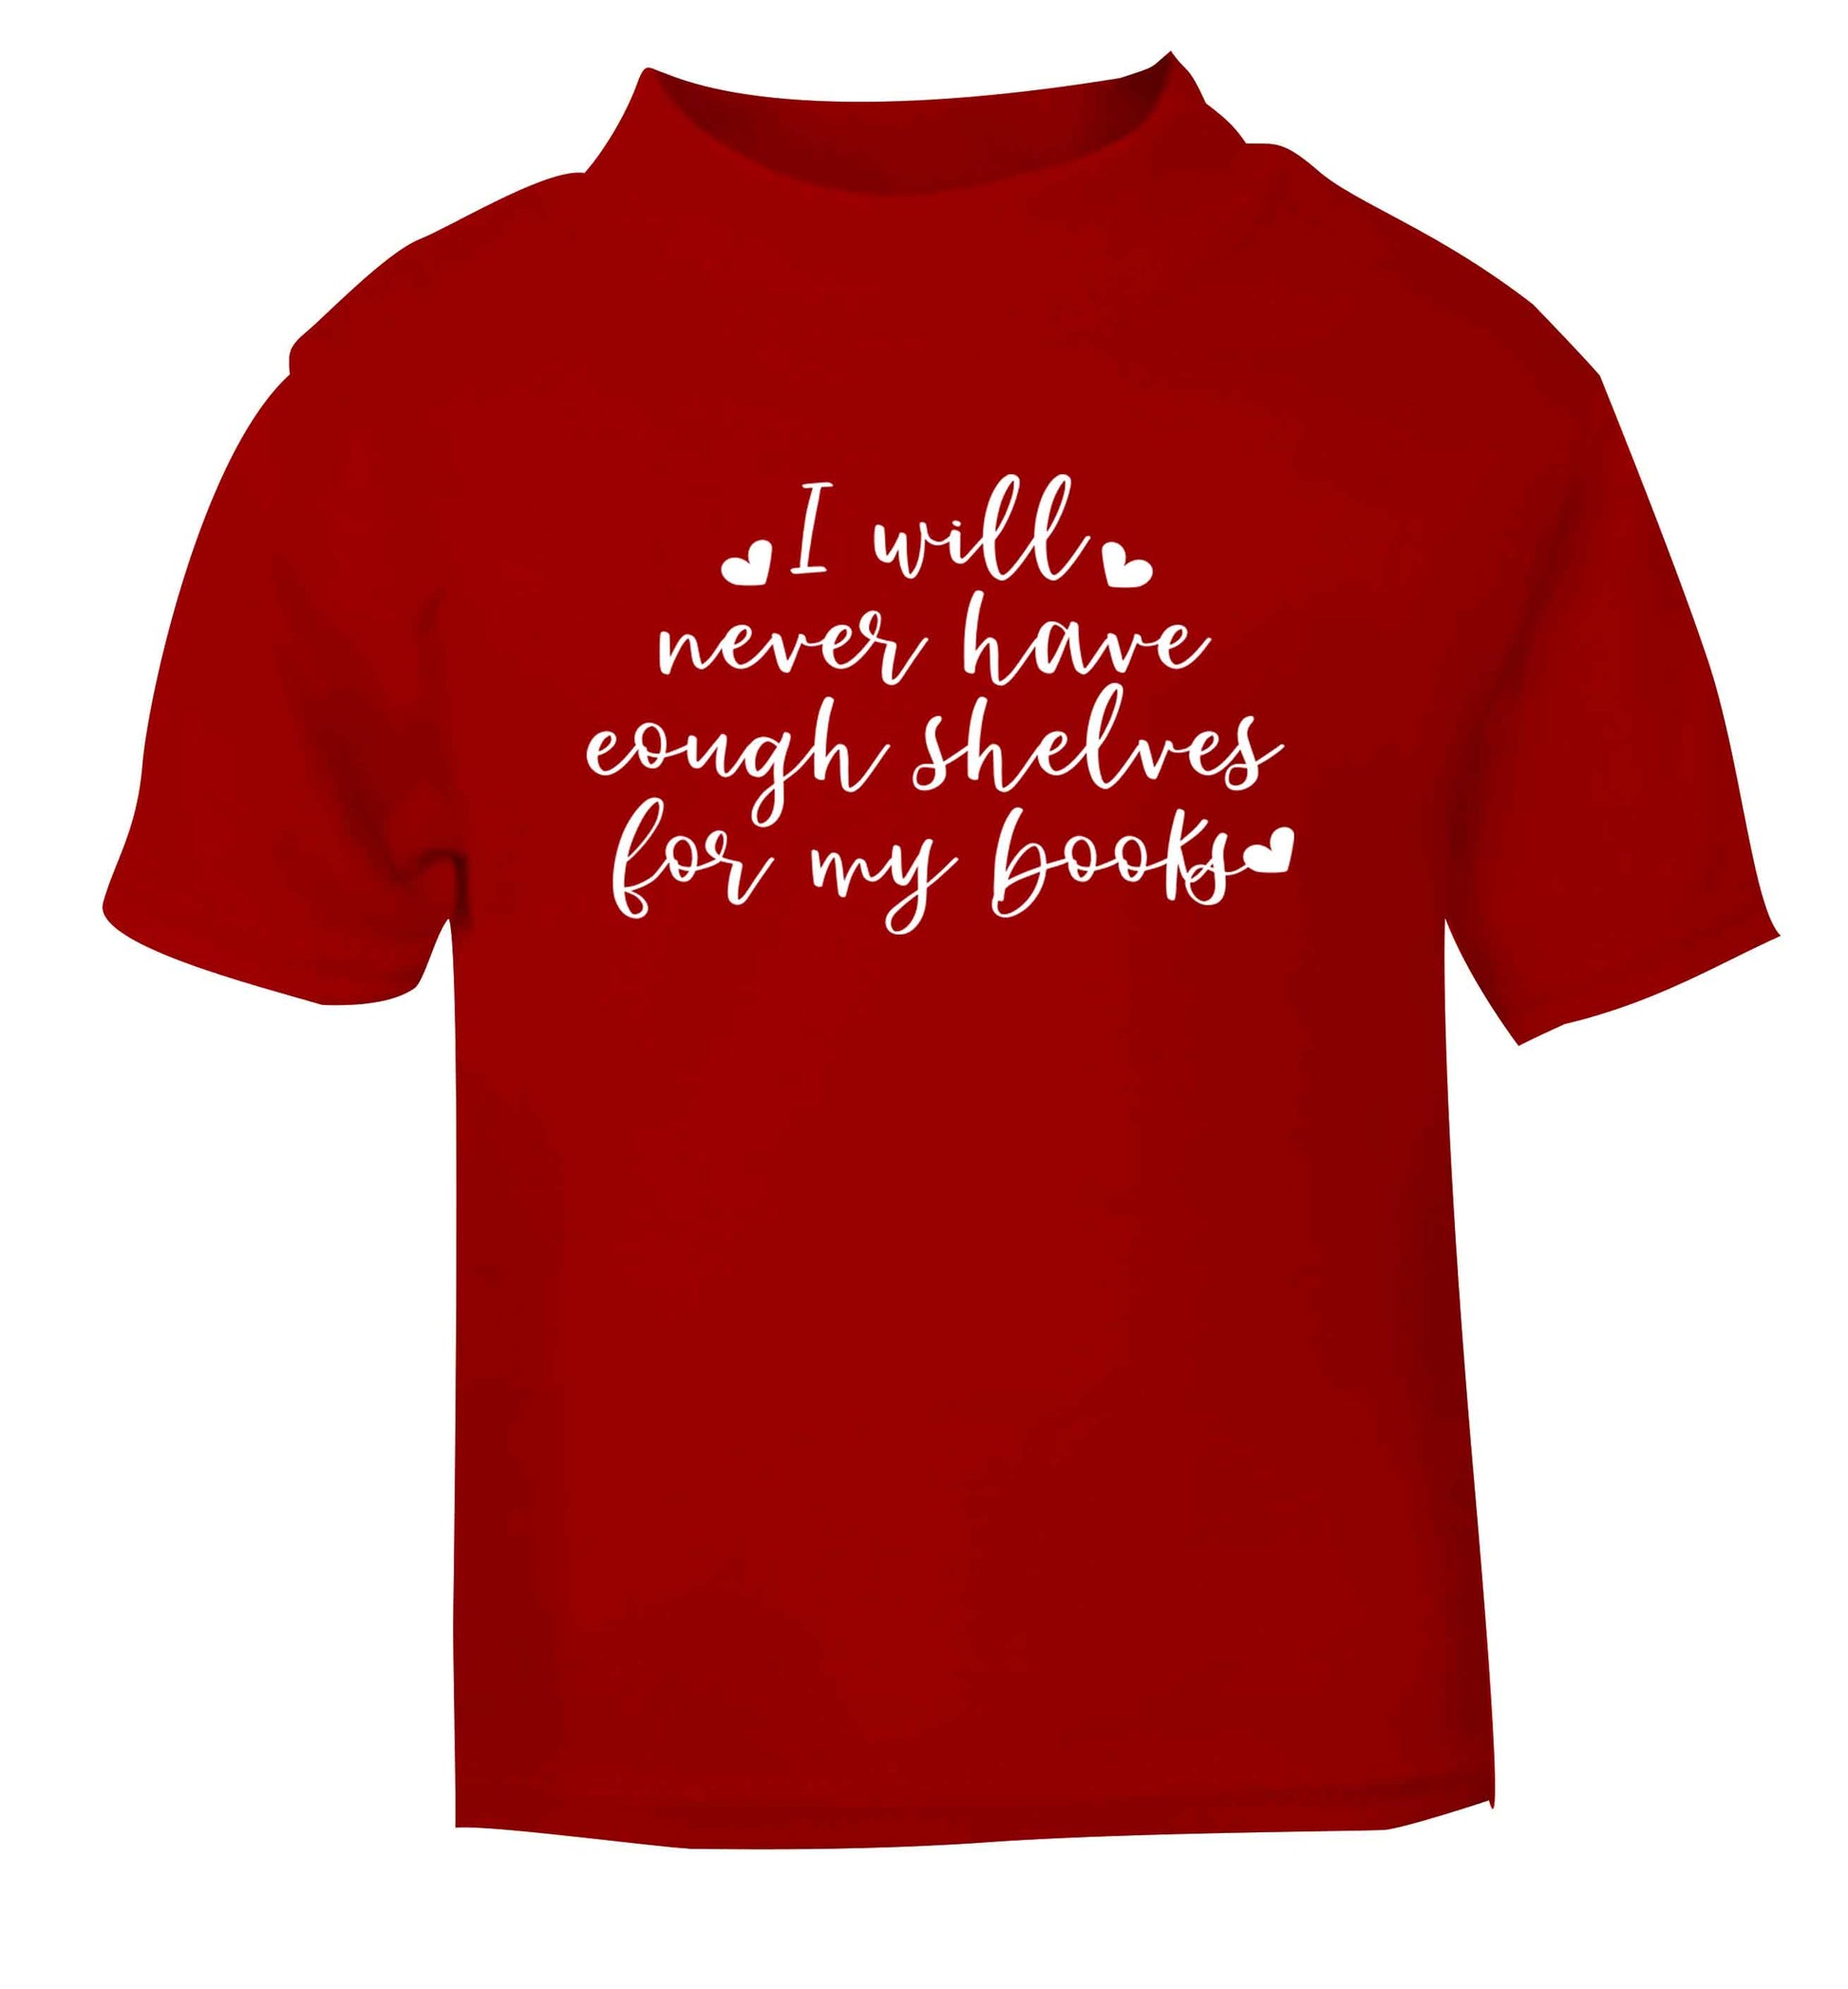 I will never have enough shelves for my books red Baby Toddler Tshirt 2 Years